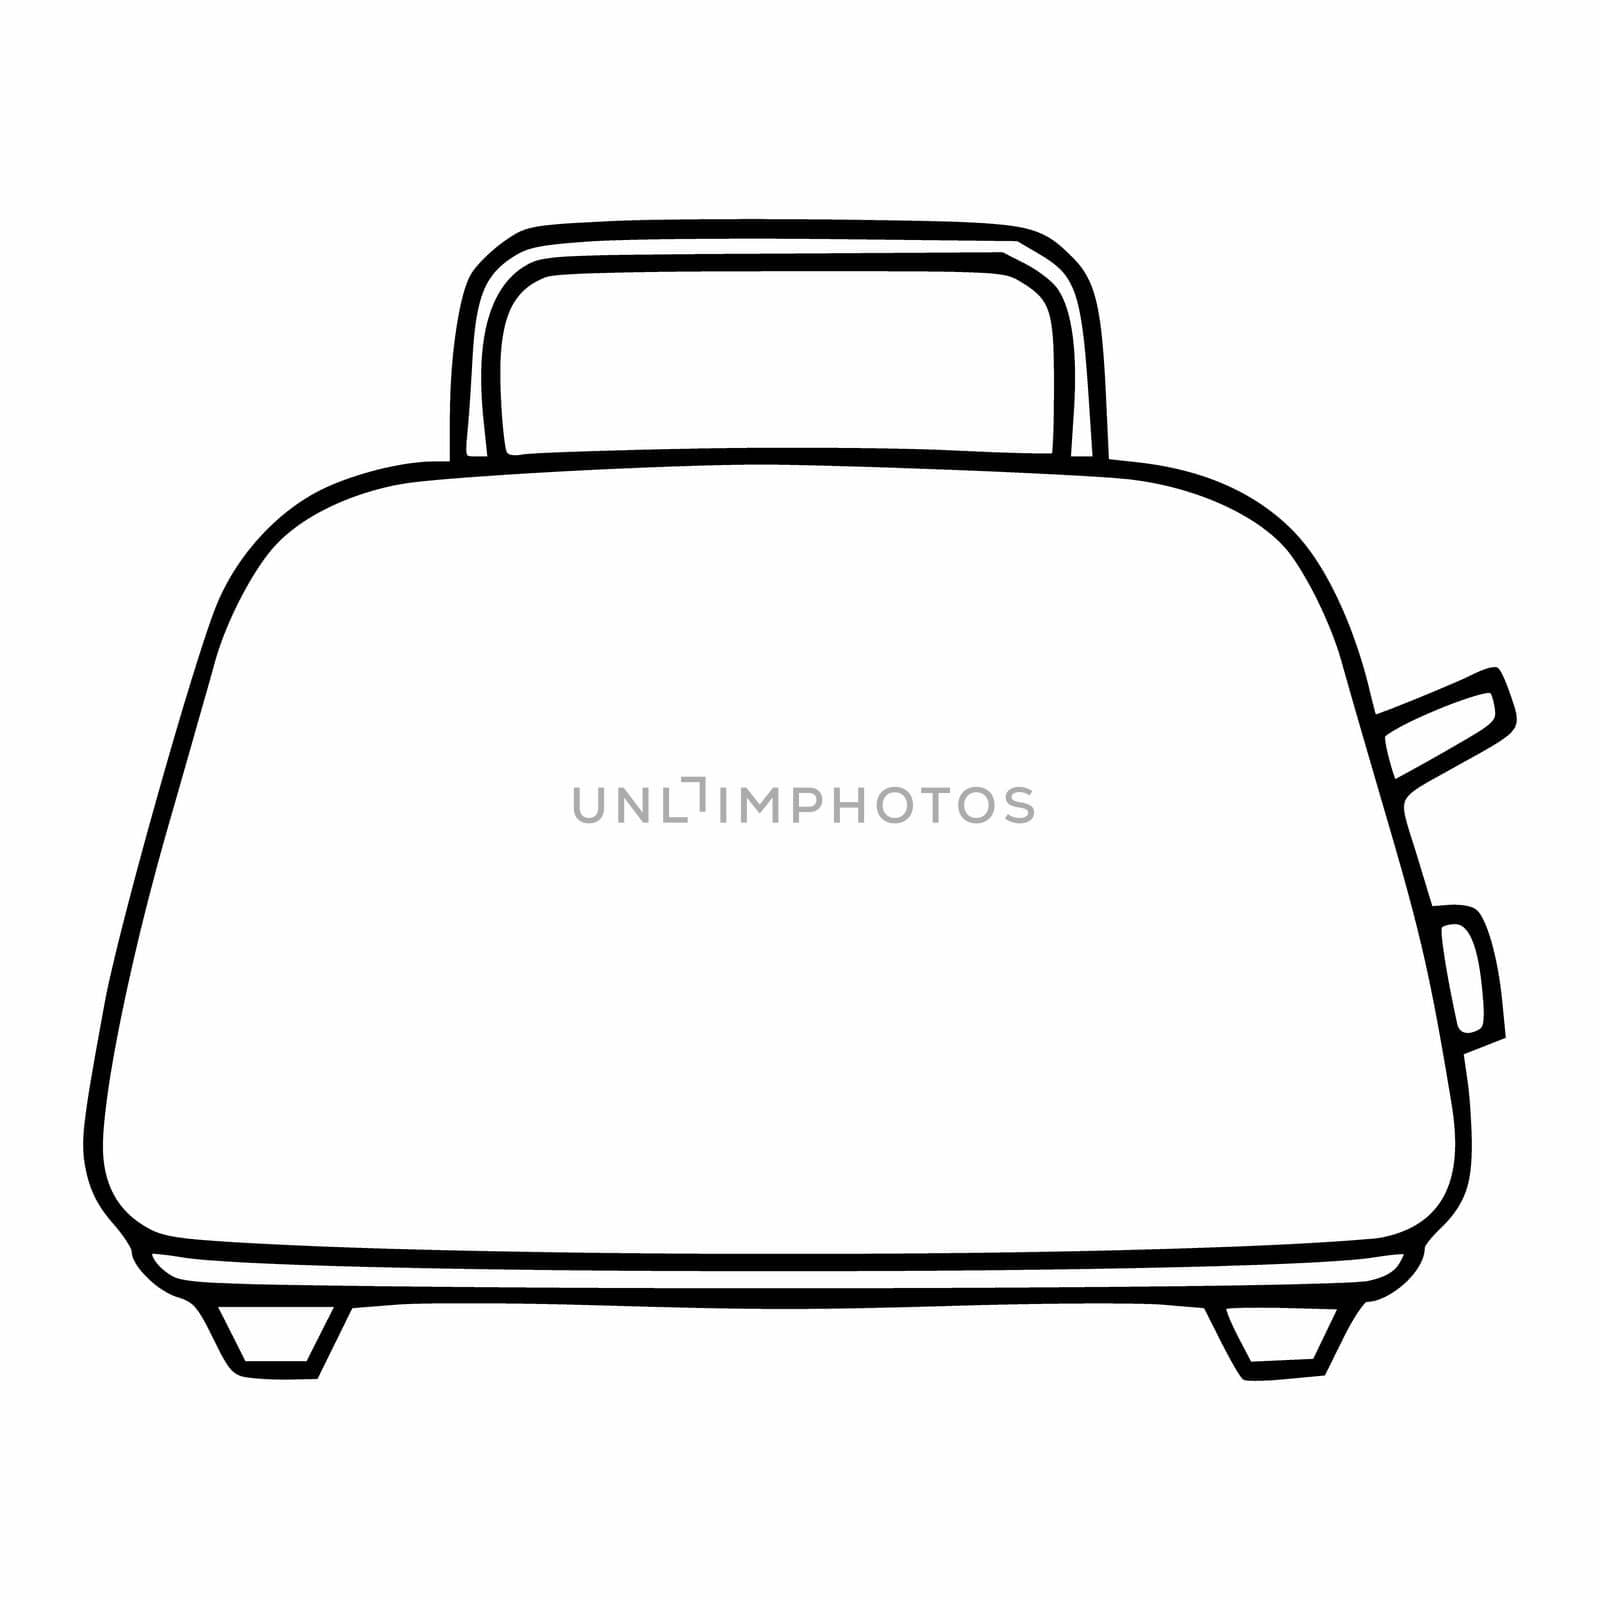 Toaster for frying bread. Vector icon of the toaster. Kitchen electric appliance. by polinka_art